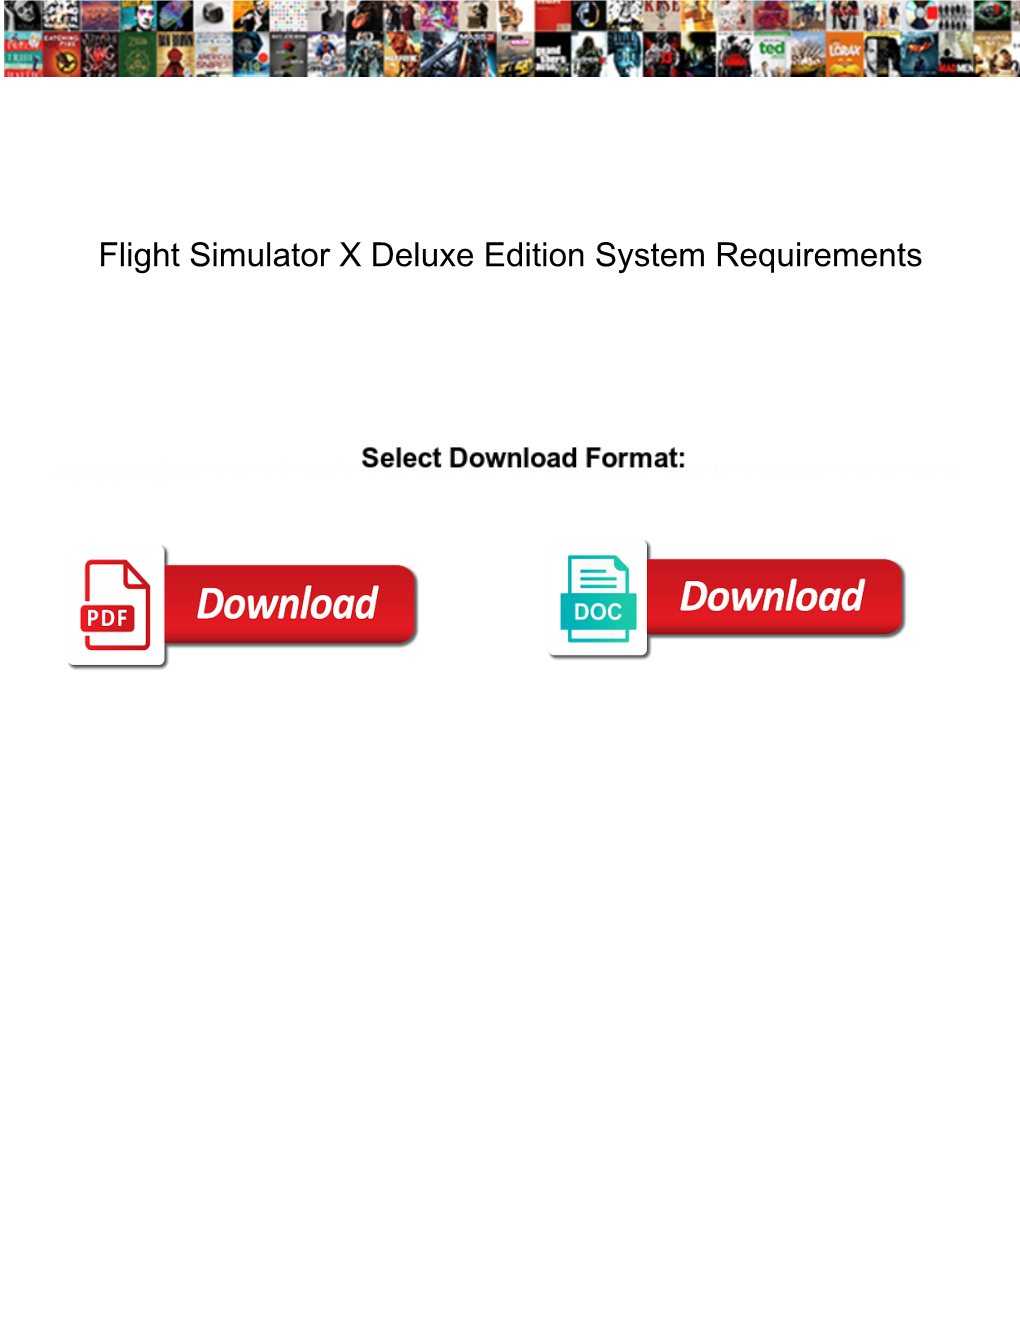 Flight Simulator X Deluxe Edition System Requirements